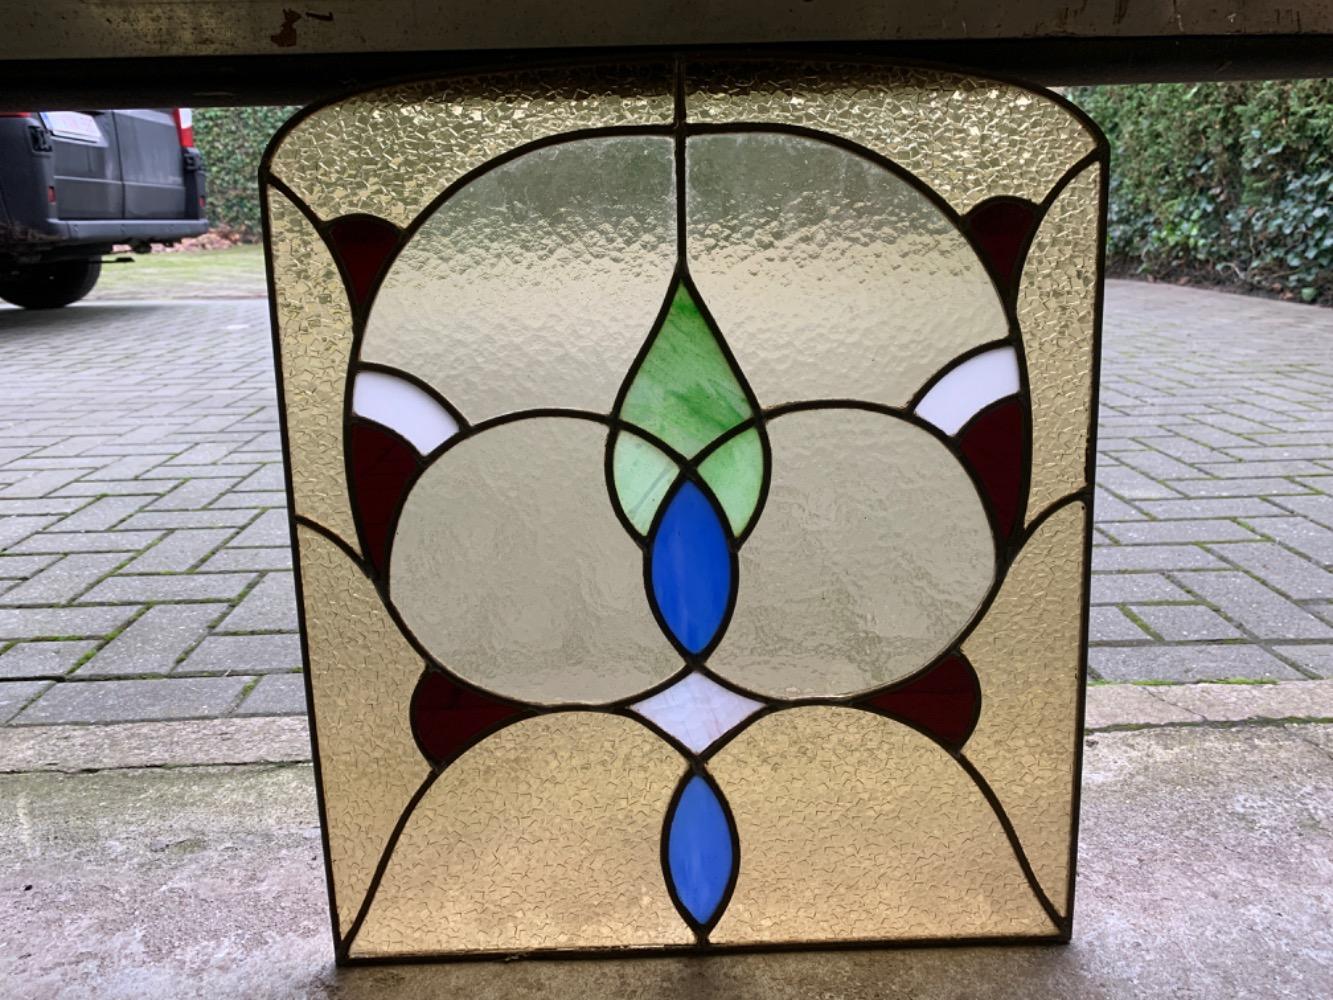 Art Deco Stained Glass Window Glantiques Recent Added Items European Antiques Decorative